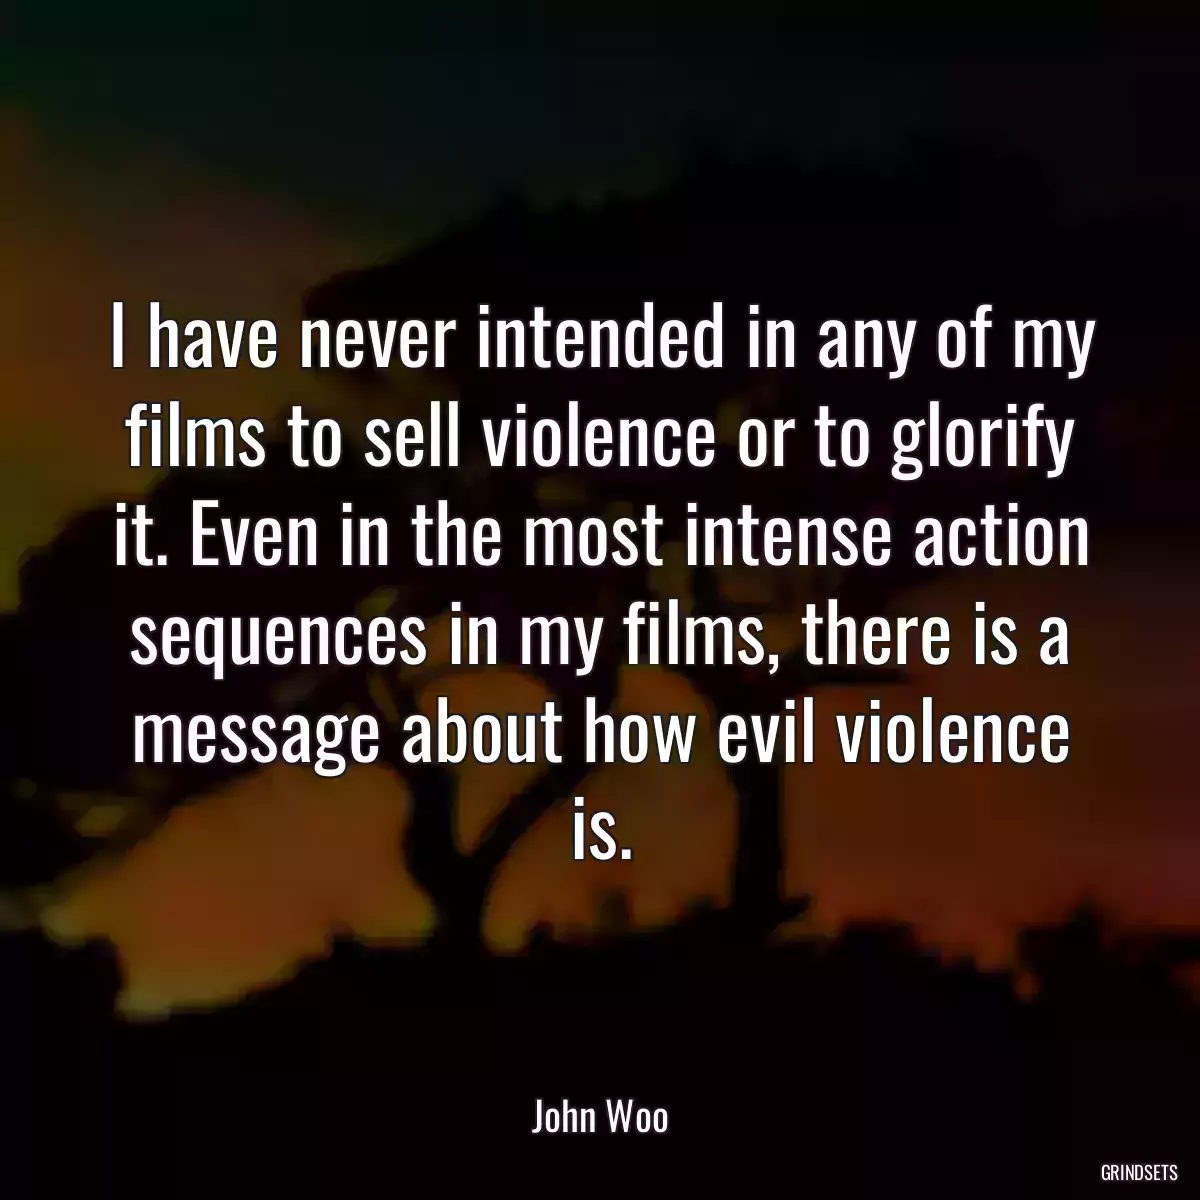 I have never intended in any of my films to sell violence or to glorify it. Even in the most intense action sequences in my films, there is a message about how evil violence is.